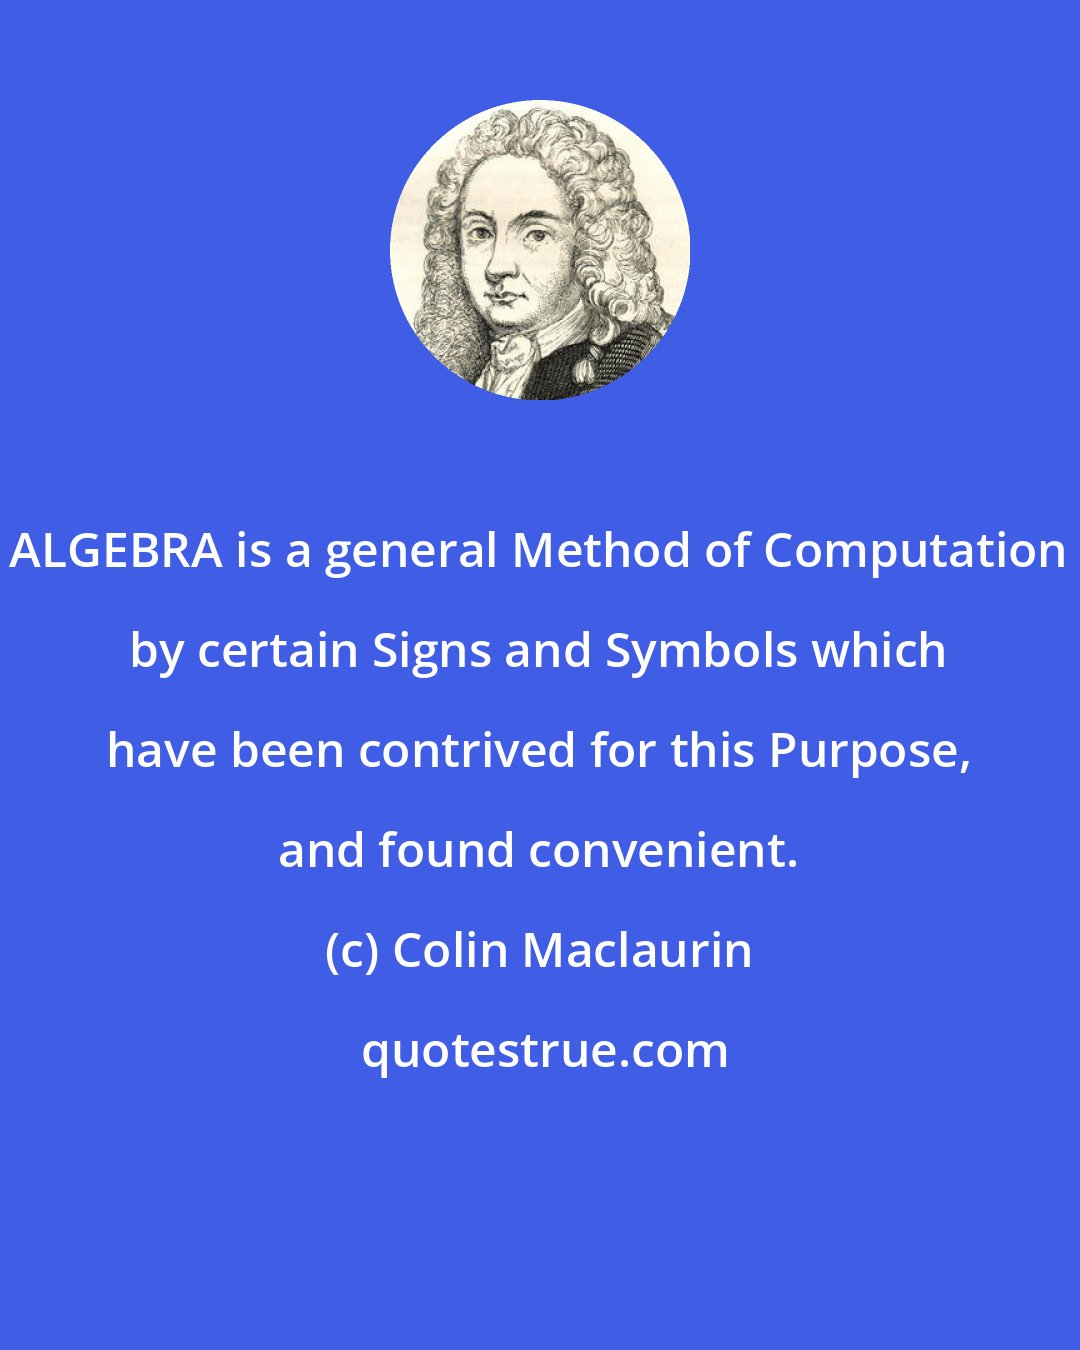 Colin Maclaurin: ALGEBRA is a general Method of Computation by certain Signs and Symbols which have been contrived for this Purpose, and found convenient.